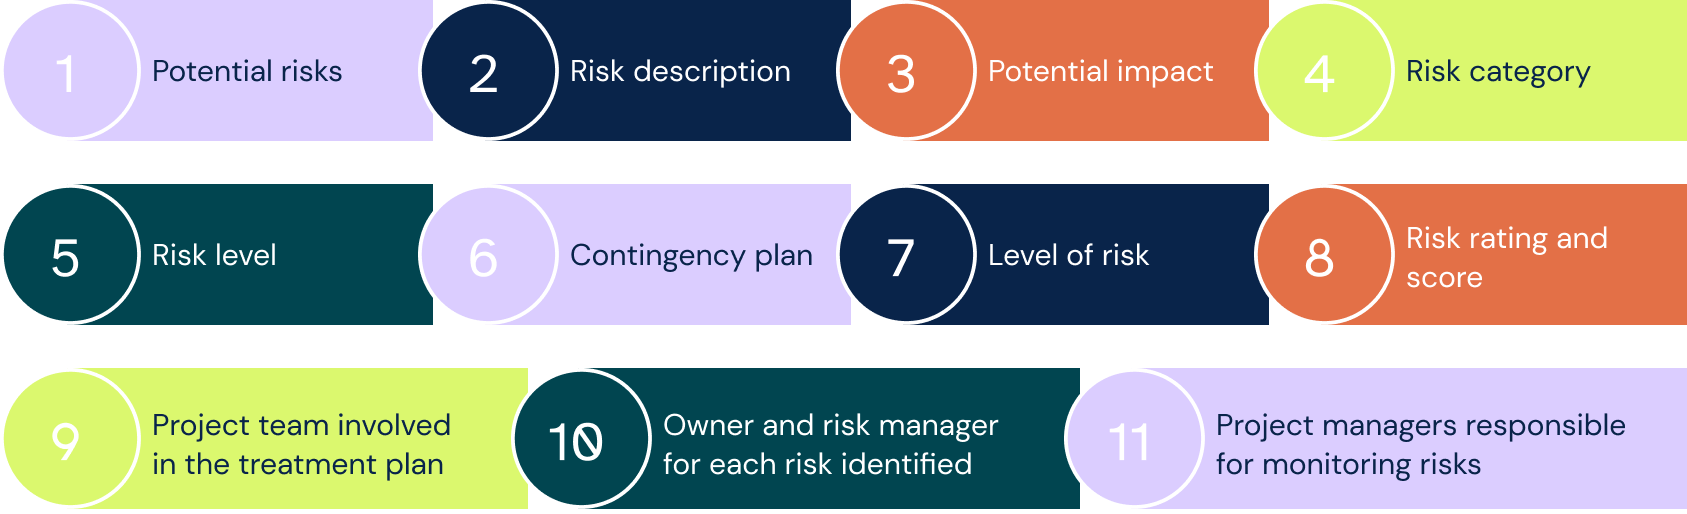 Elements of a risk register